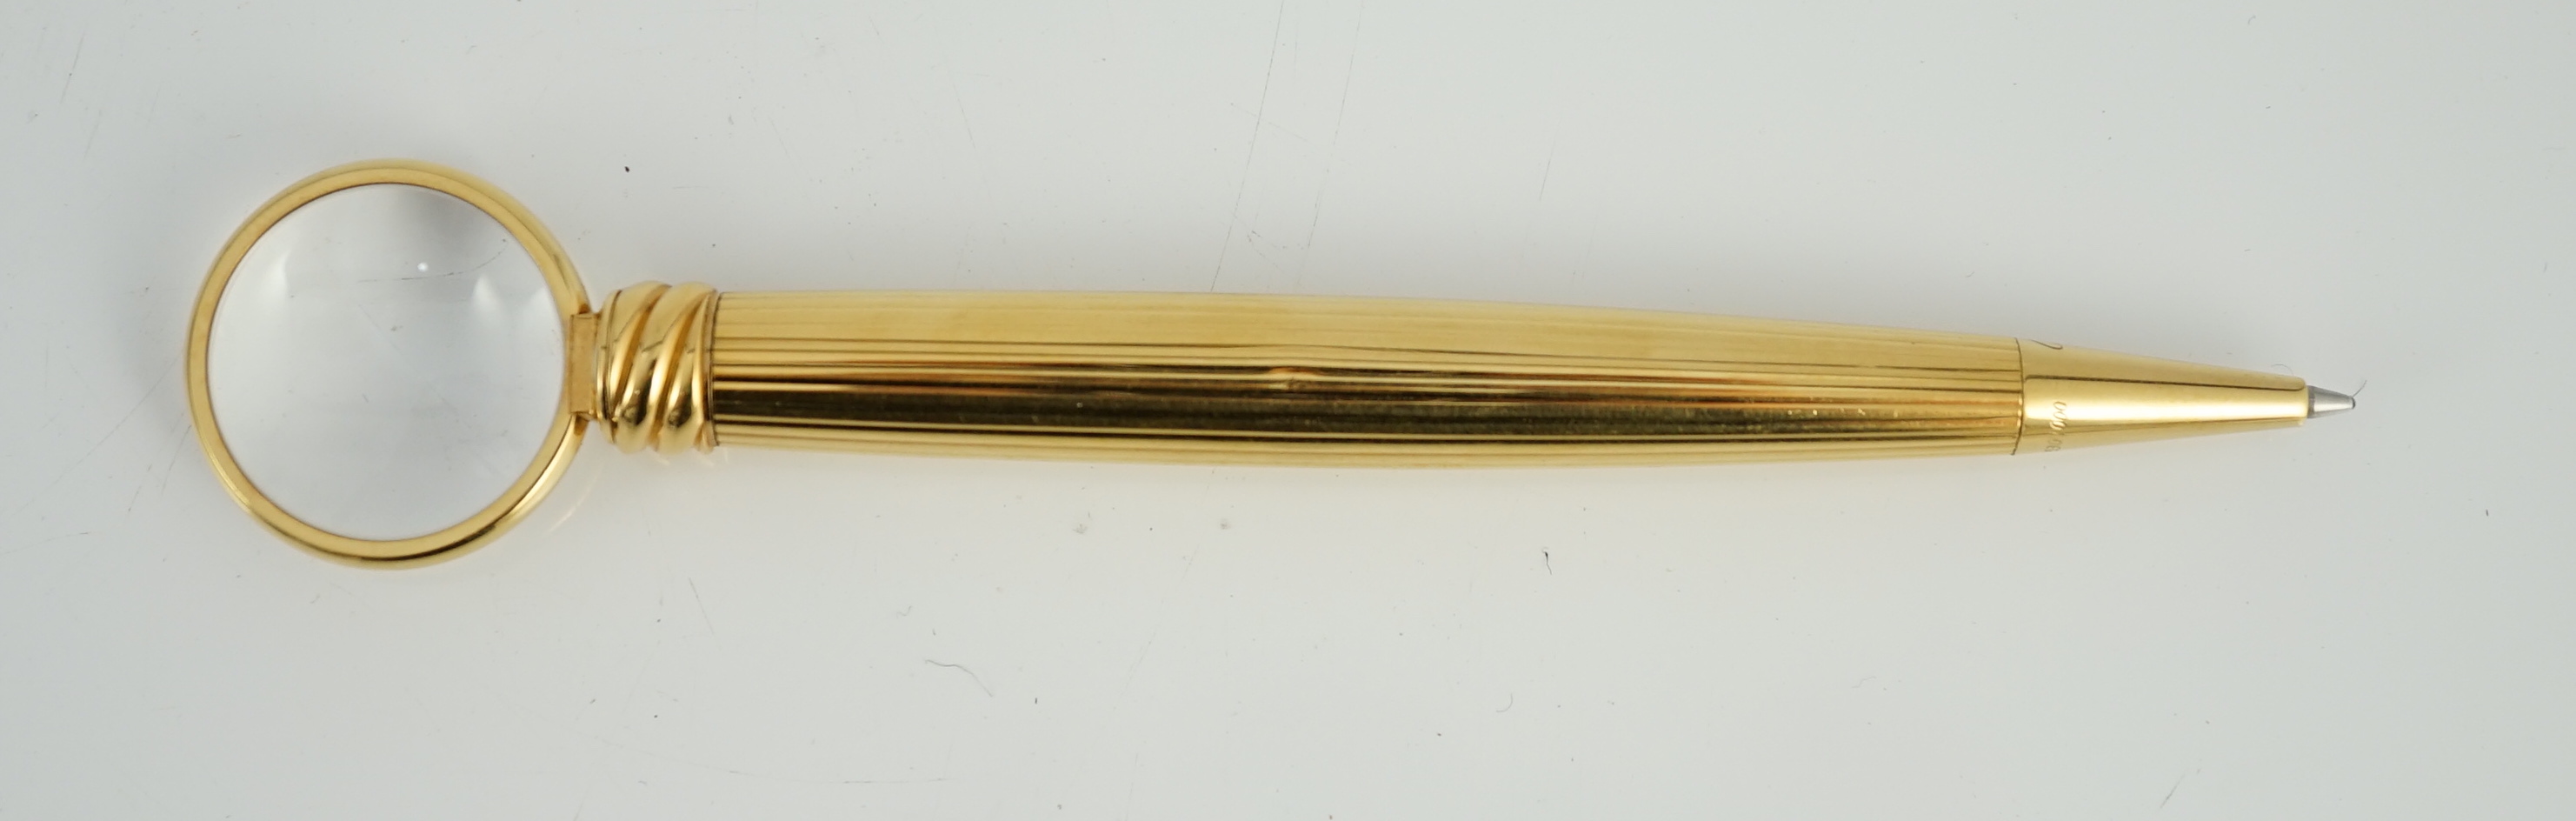 A Cartier gold plated loupe limited edition ballpoint pen